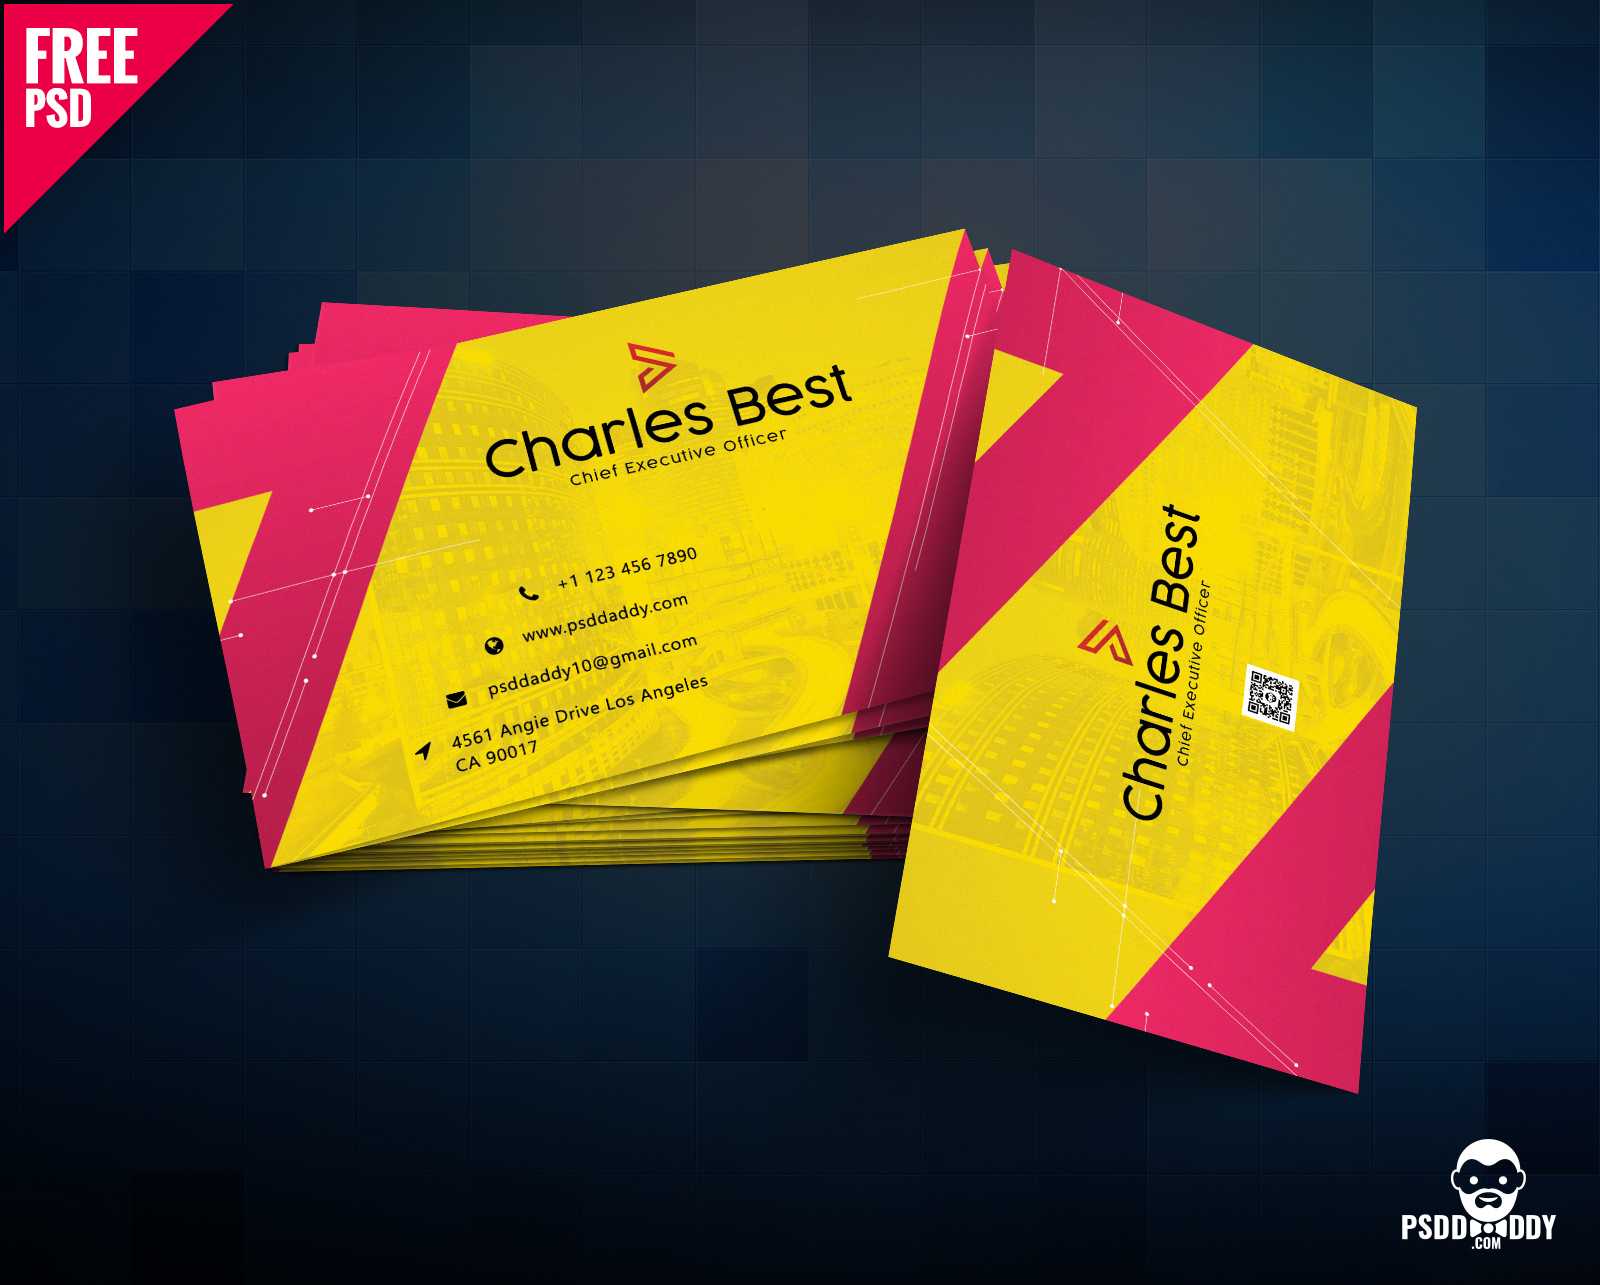 Download] Creative Business Card Free Psd | Psddaddy Inside Name Card Template Psd Free Download